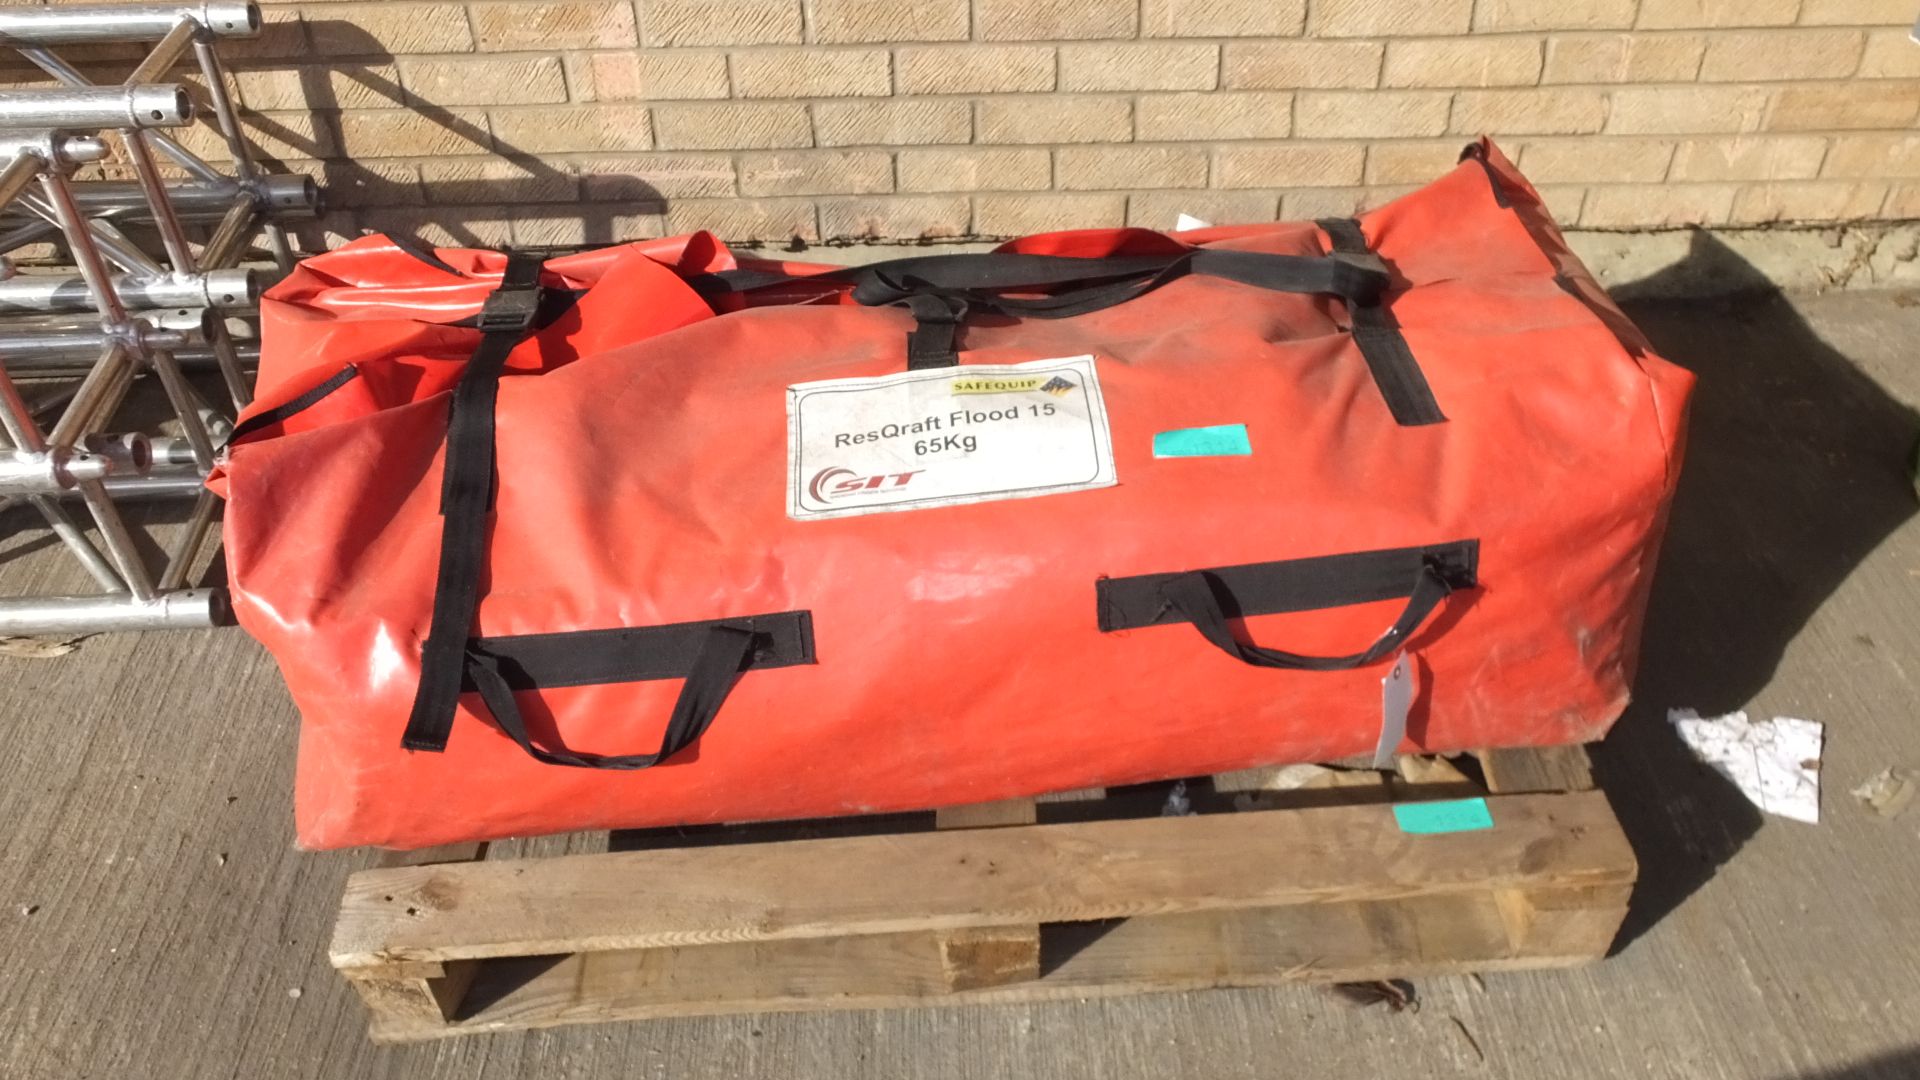 SIT Safequip ReqQraft Flood 15 inflatable boat - Image 11 of 11